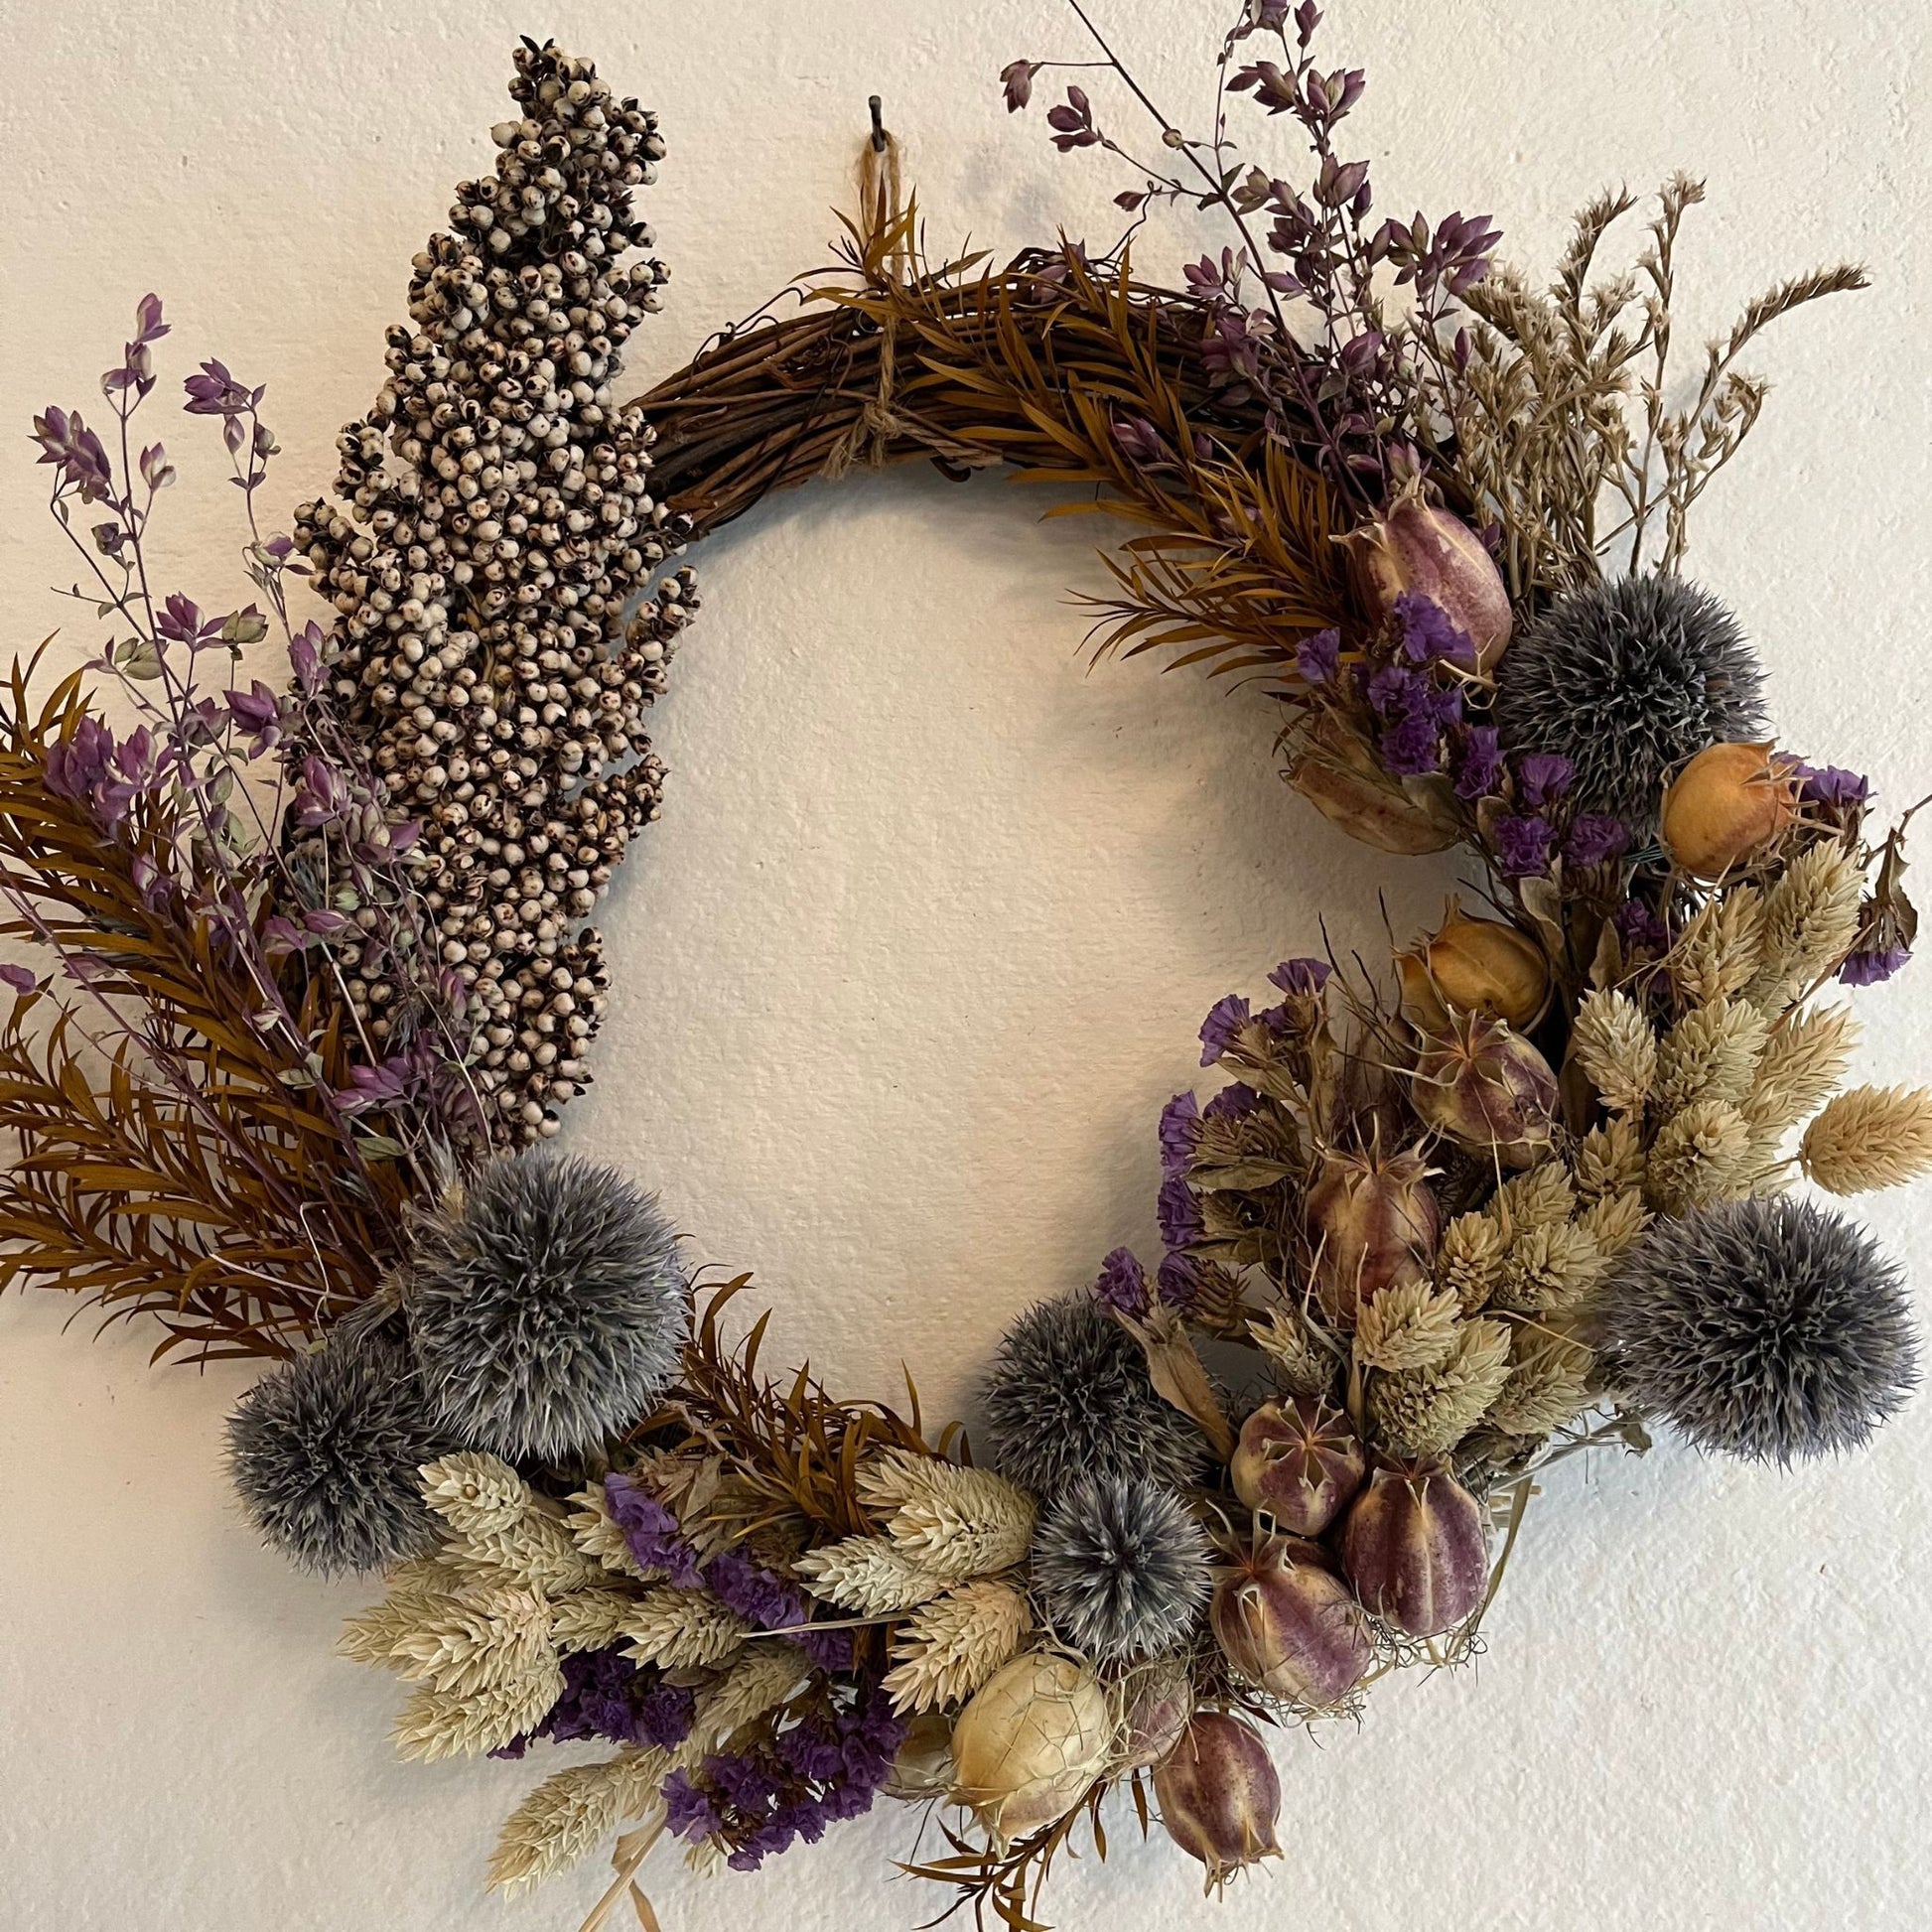 Dried Floral Wreath with Echinops handmade in Catskill NY. 11.5 x 10 Inches